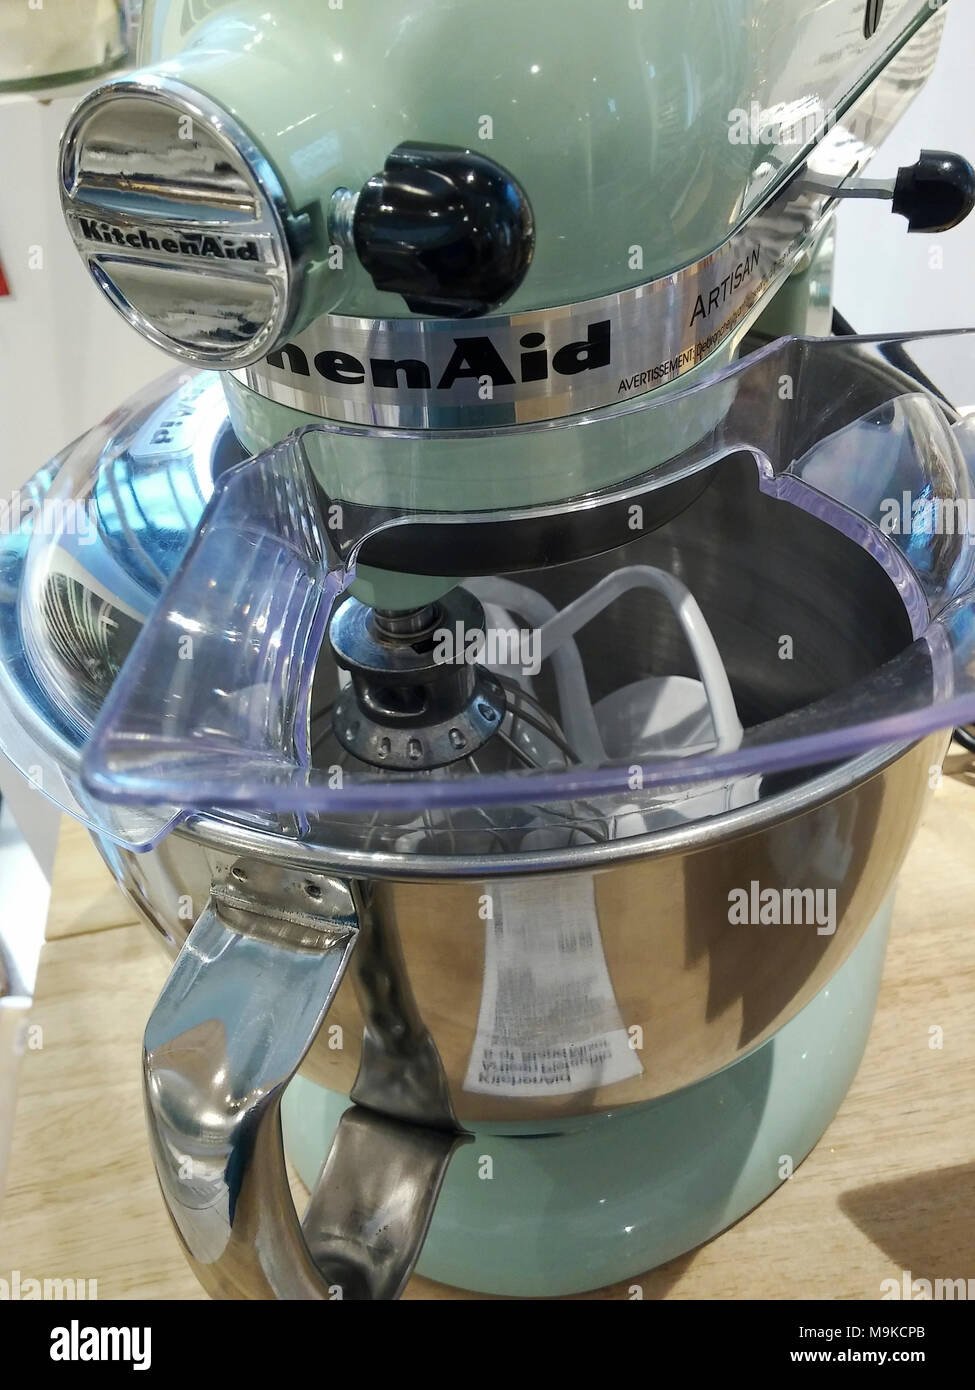 A KitchenAid brand mixer appliance on sale in a store in New York on Saturday, March 17, 2018. KitchenAid is a brand of the Whirlpool Corp., the world's largest maker of home appliances (© Richard B. Levine) Stock Photo